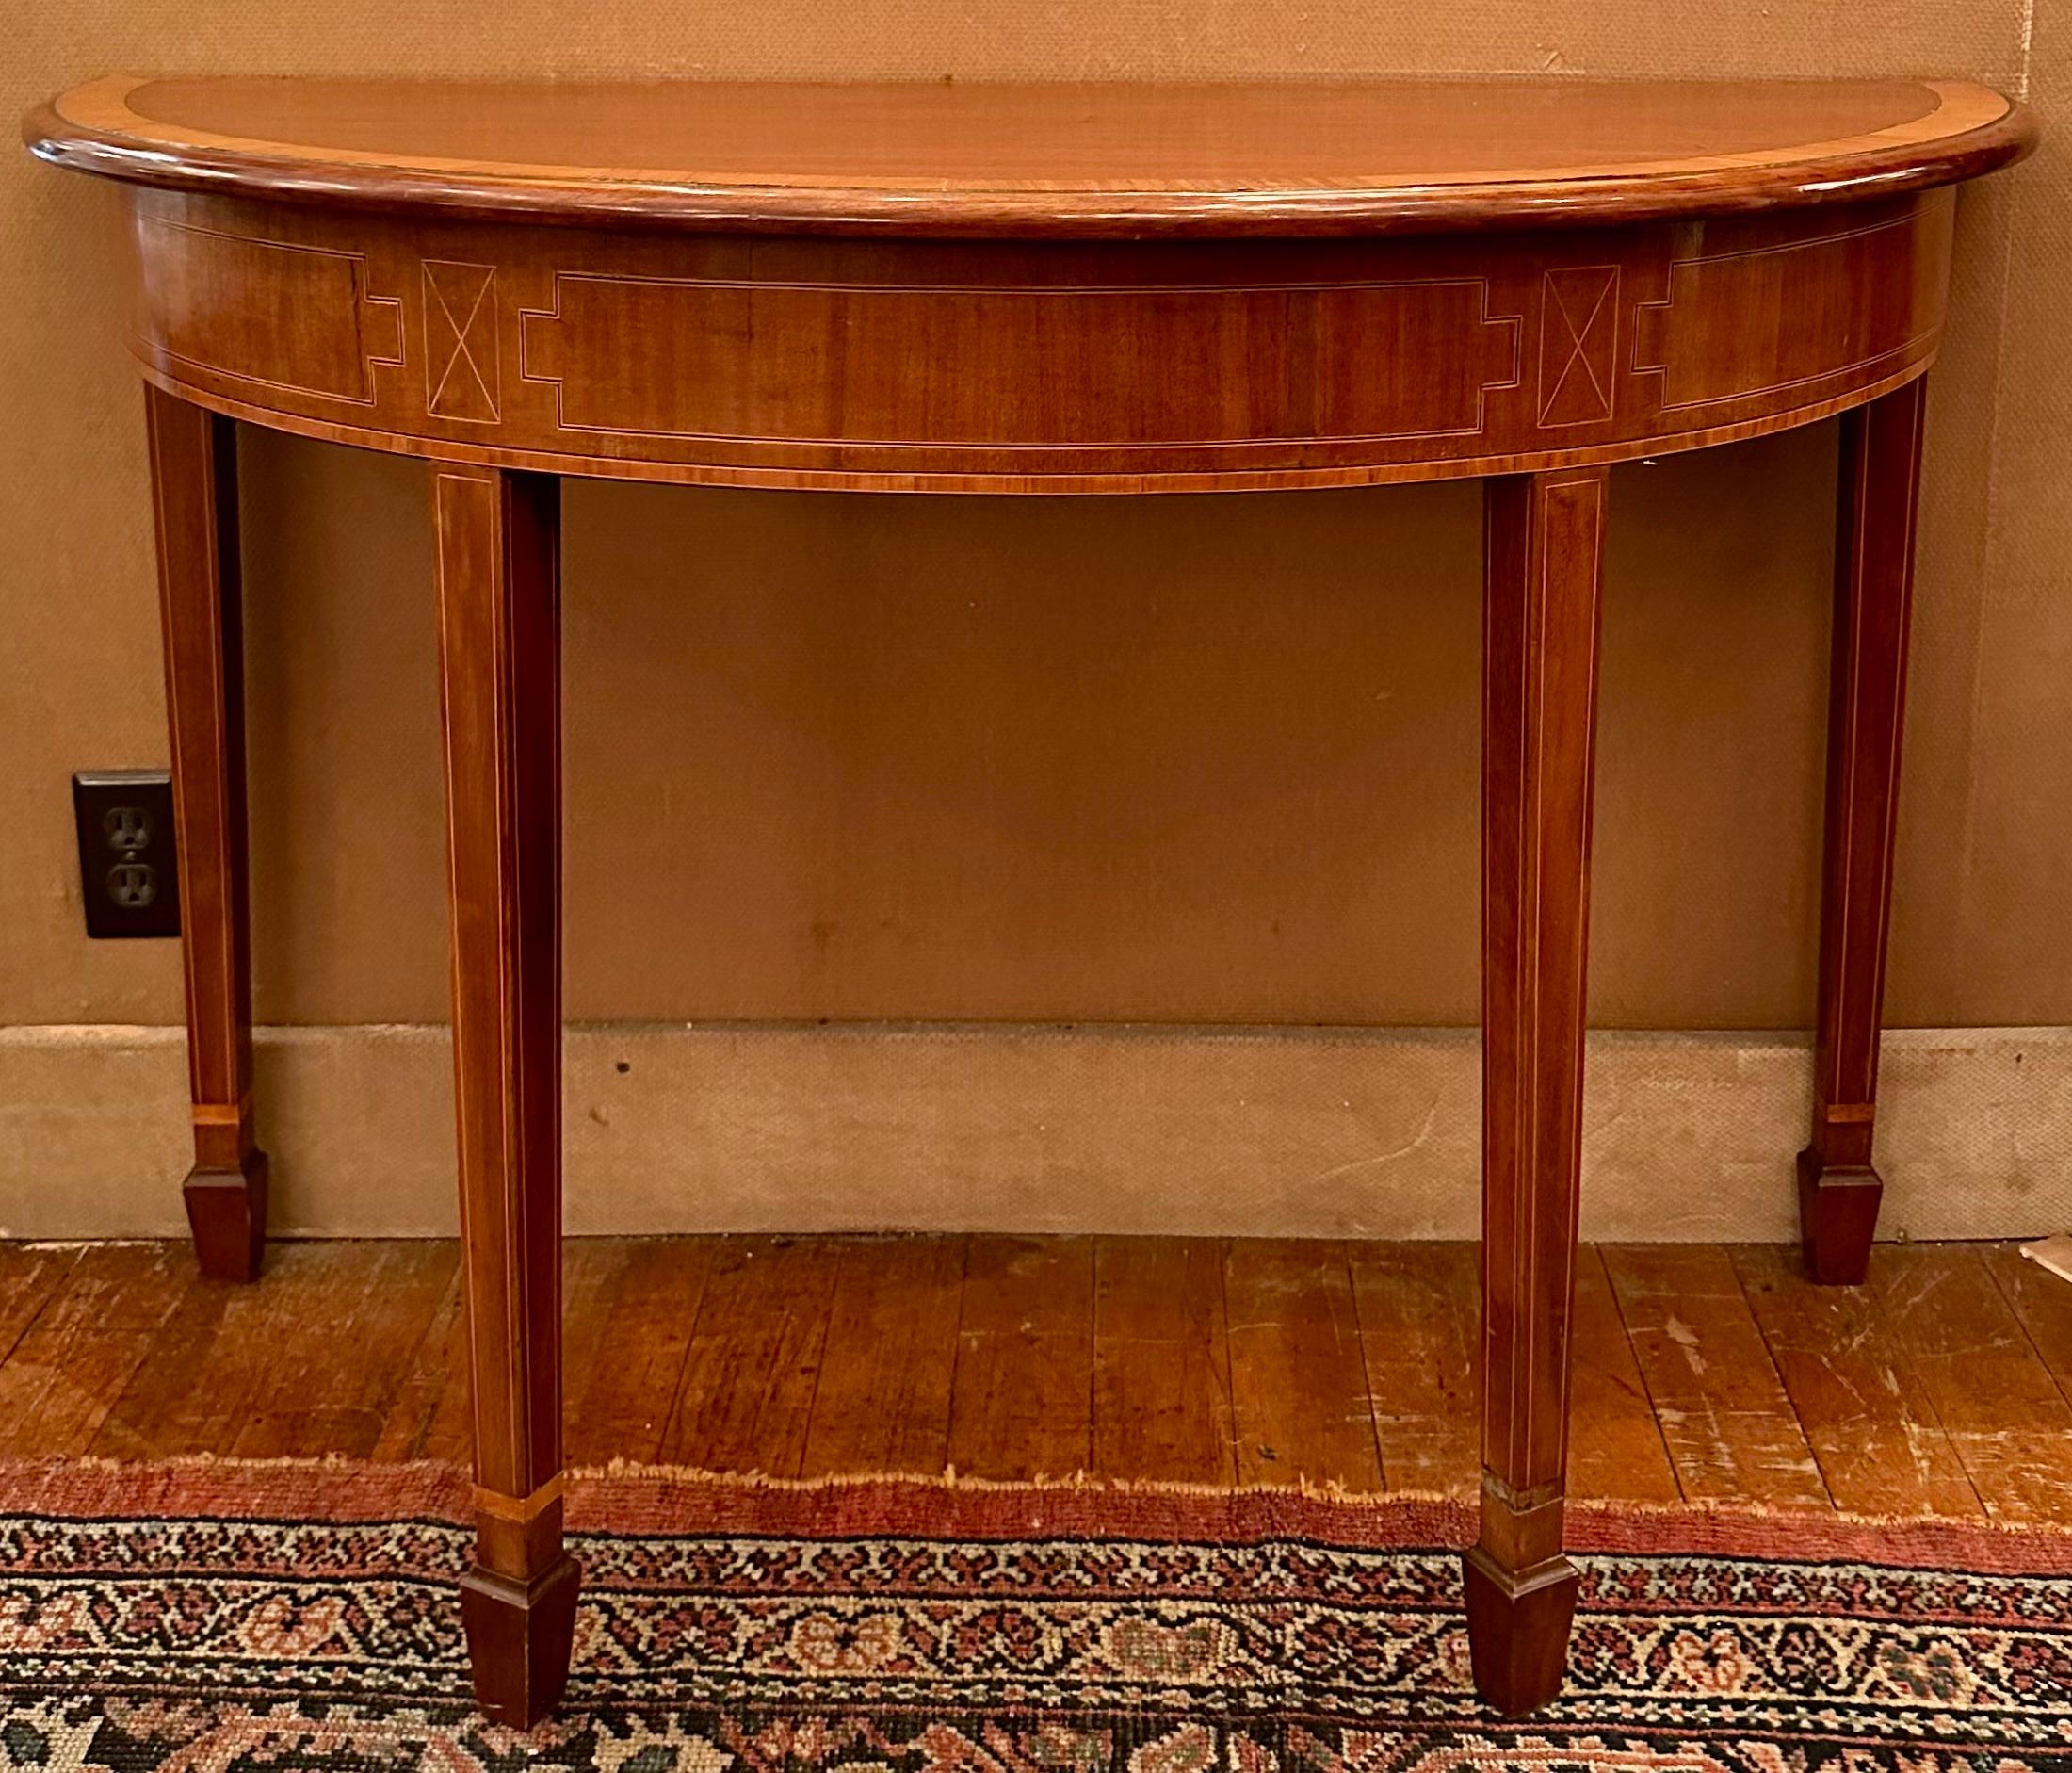 Pair Antique 19th Century English Mahogany Console Tables with Satinwood Inlay, Circa 1890's.